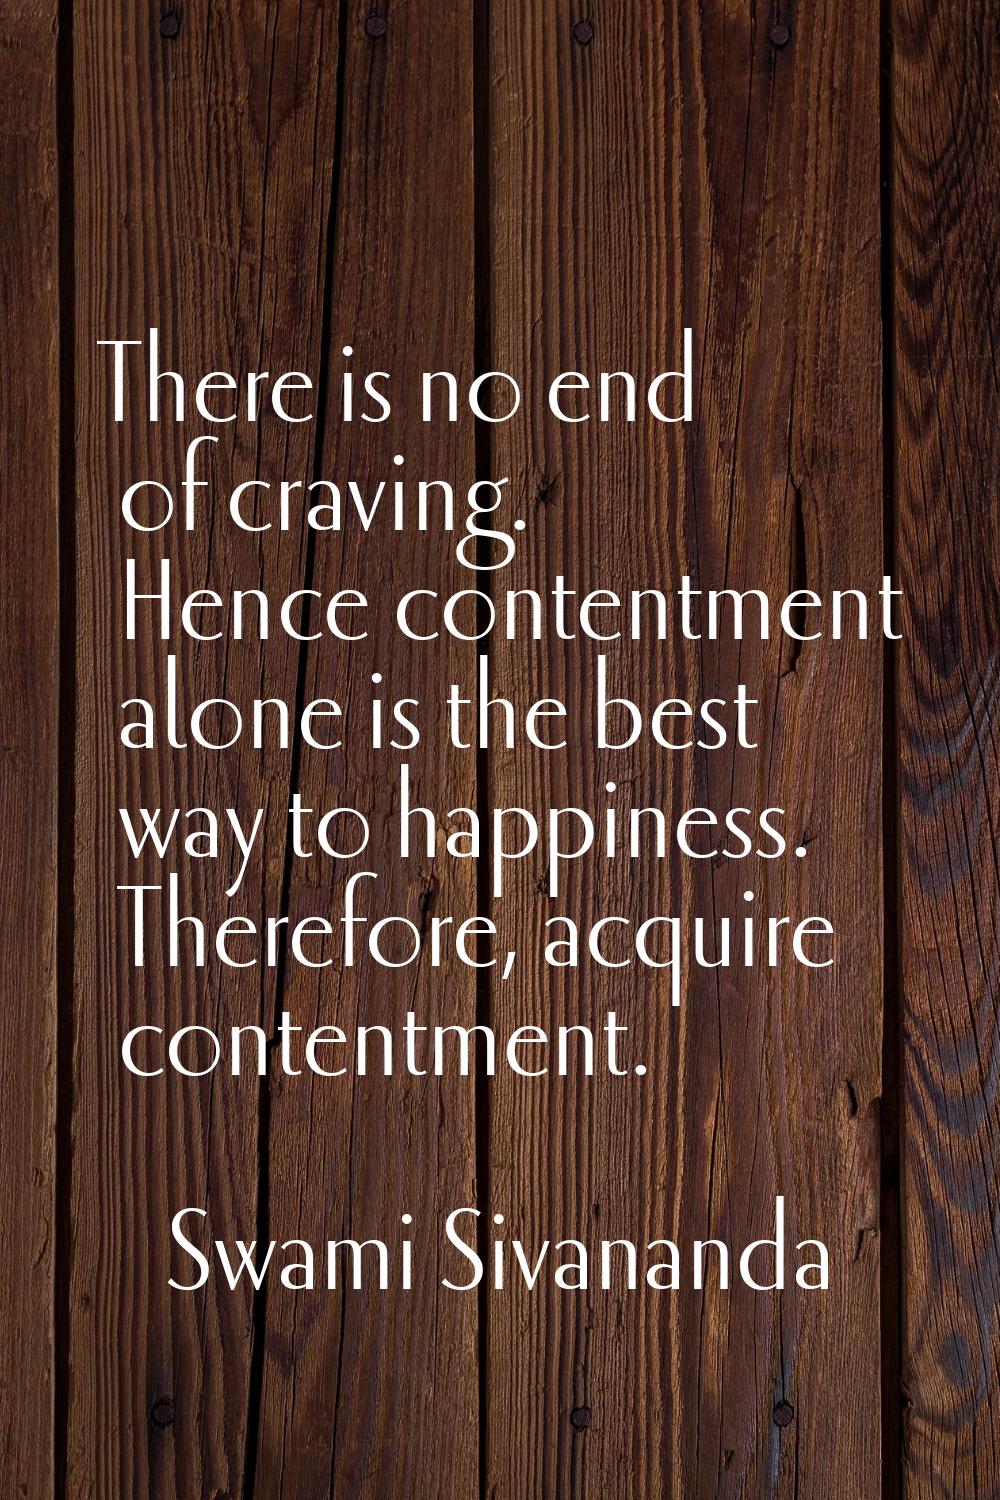 There is no end of craving. Hence contentment alone is the best way to happiness. Therefore, acquir